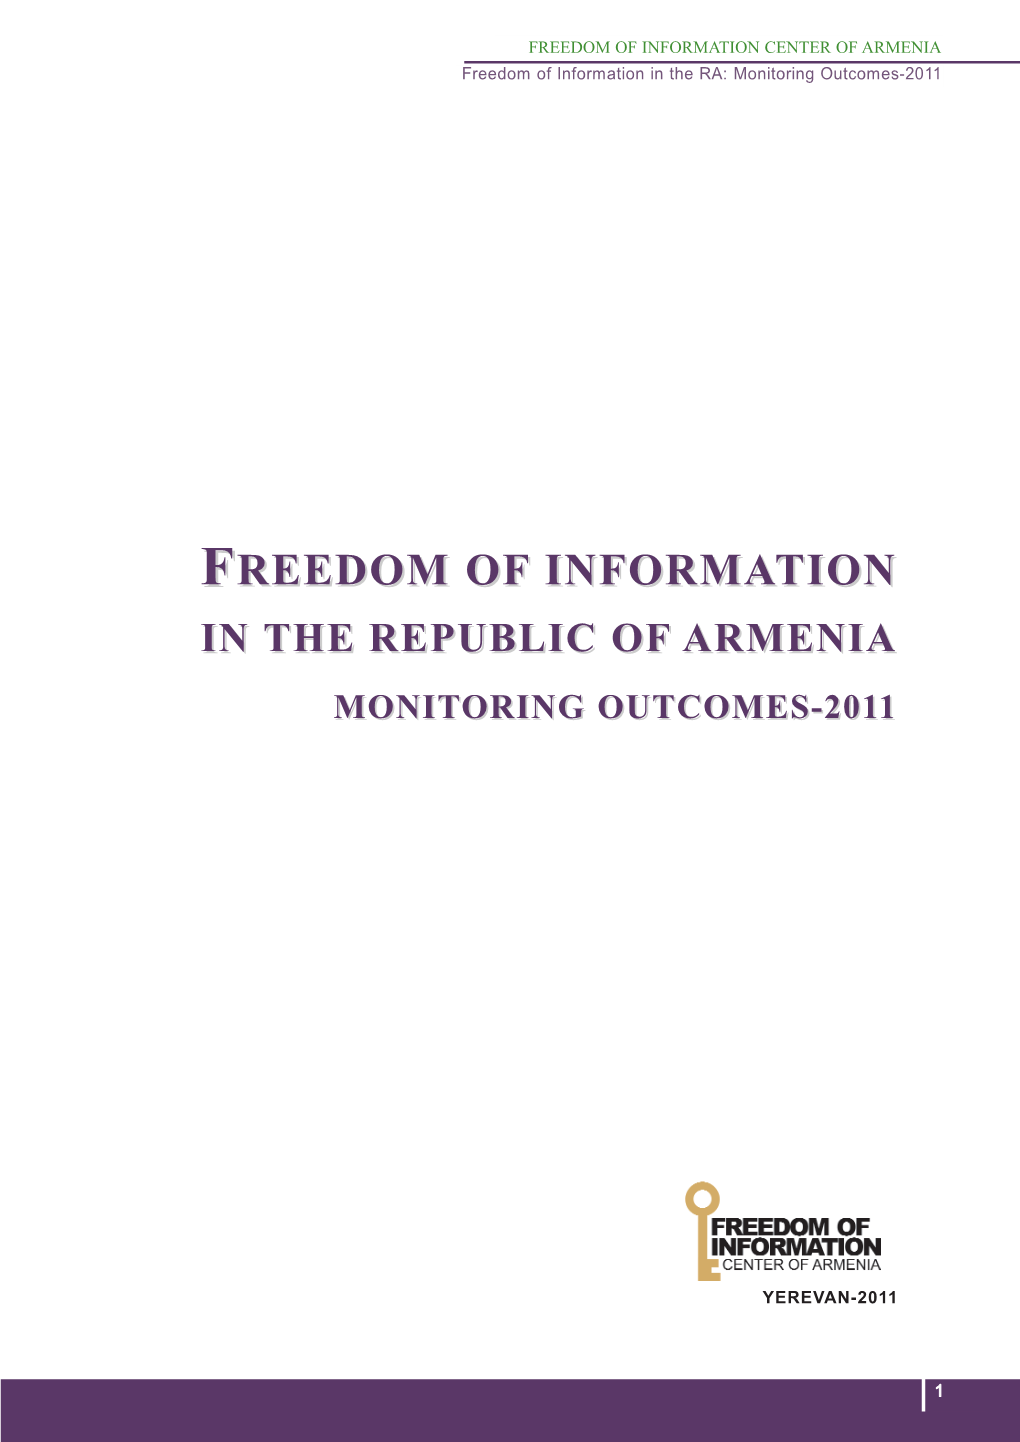 Freedom of Information in Armenia: Monitoring Outcomes-2011